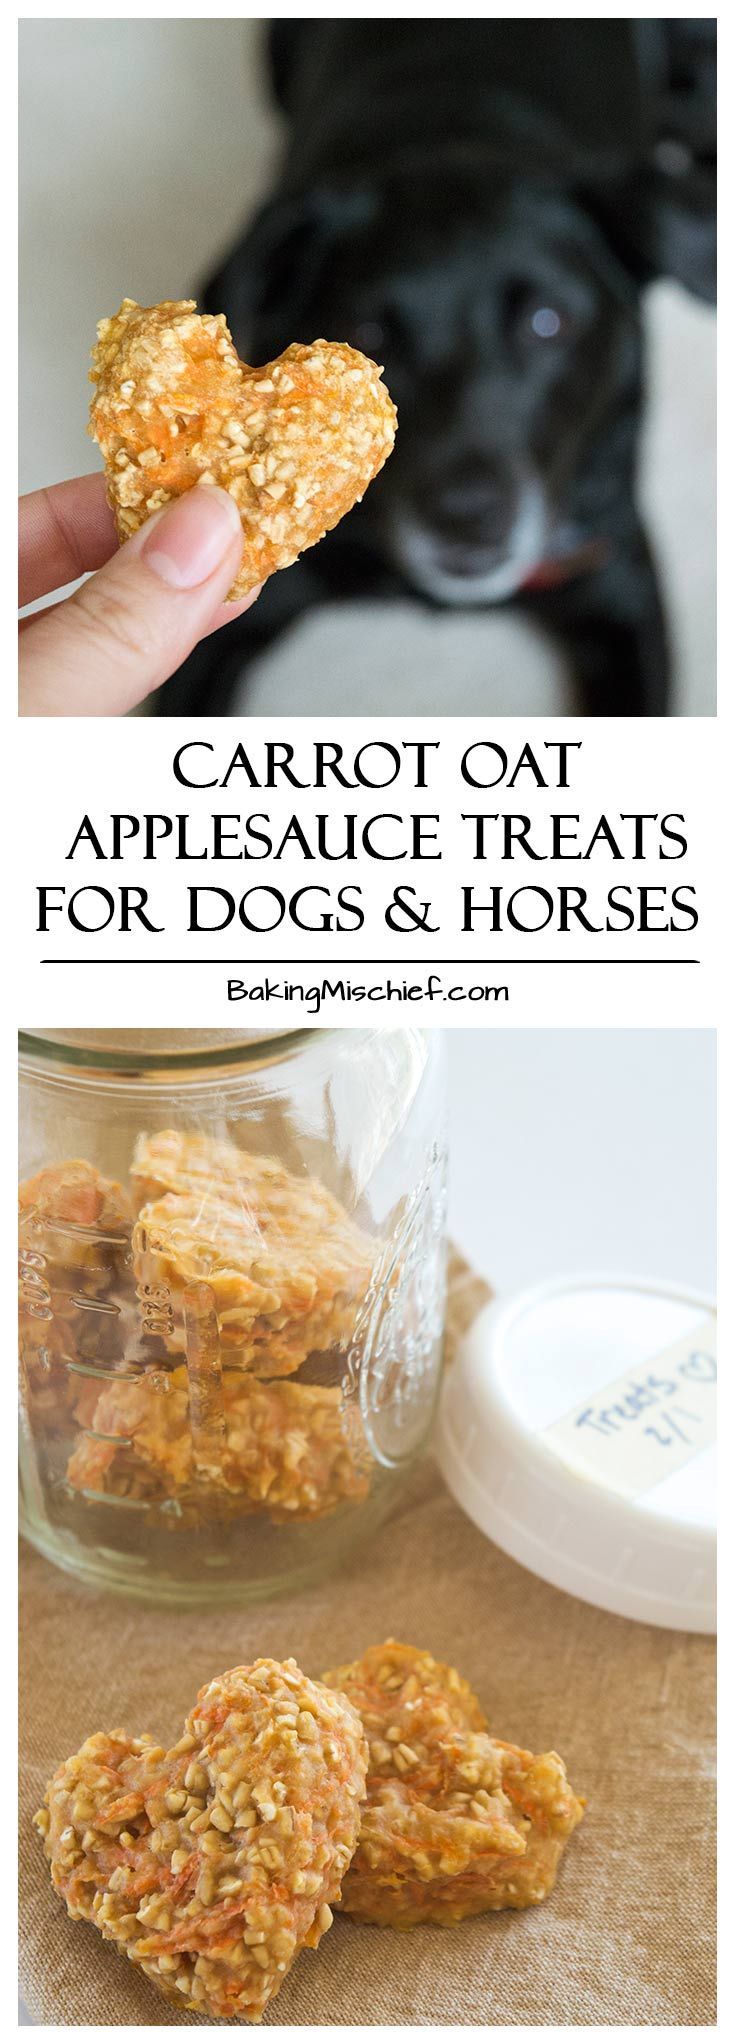 Carrot Oat Applesauce Treats for Dogs and Horses